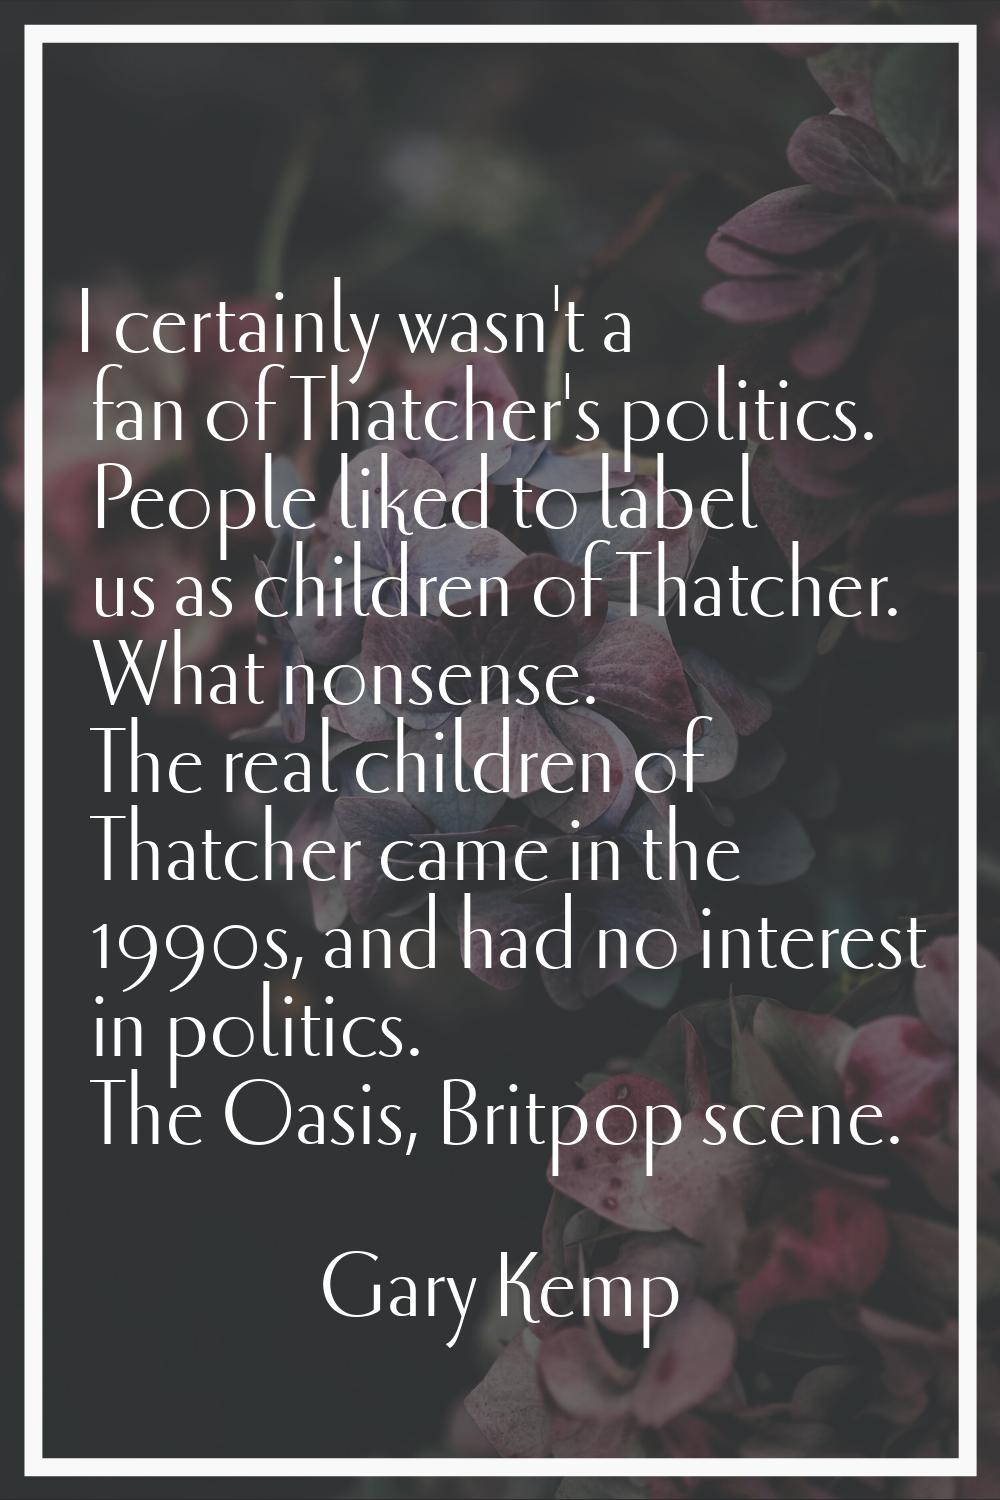 I certainly wasn't a fan of Thatcher's politics. People liked to label us as children of Thatcher. 